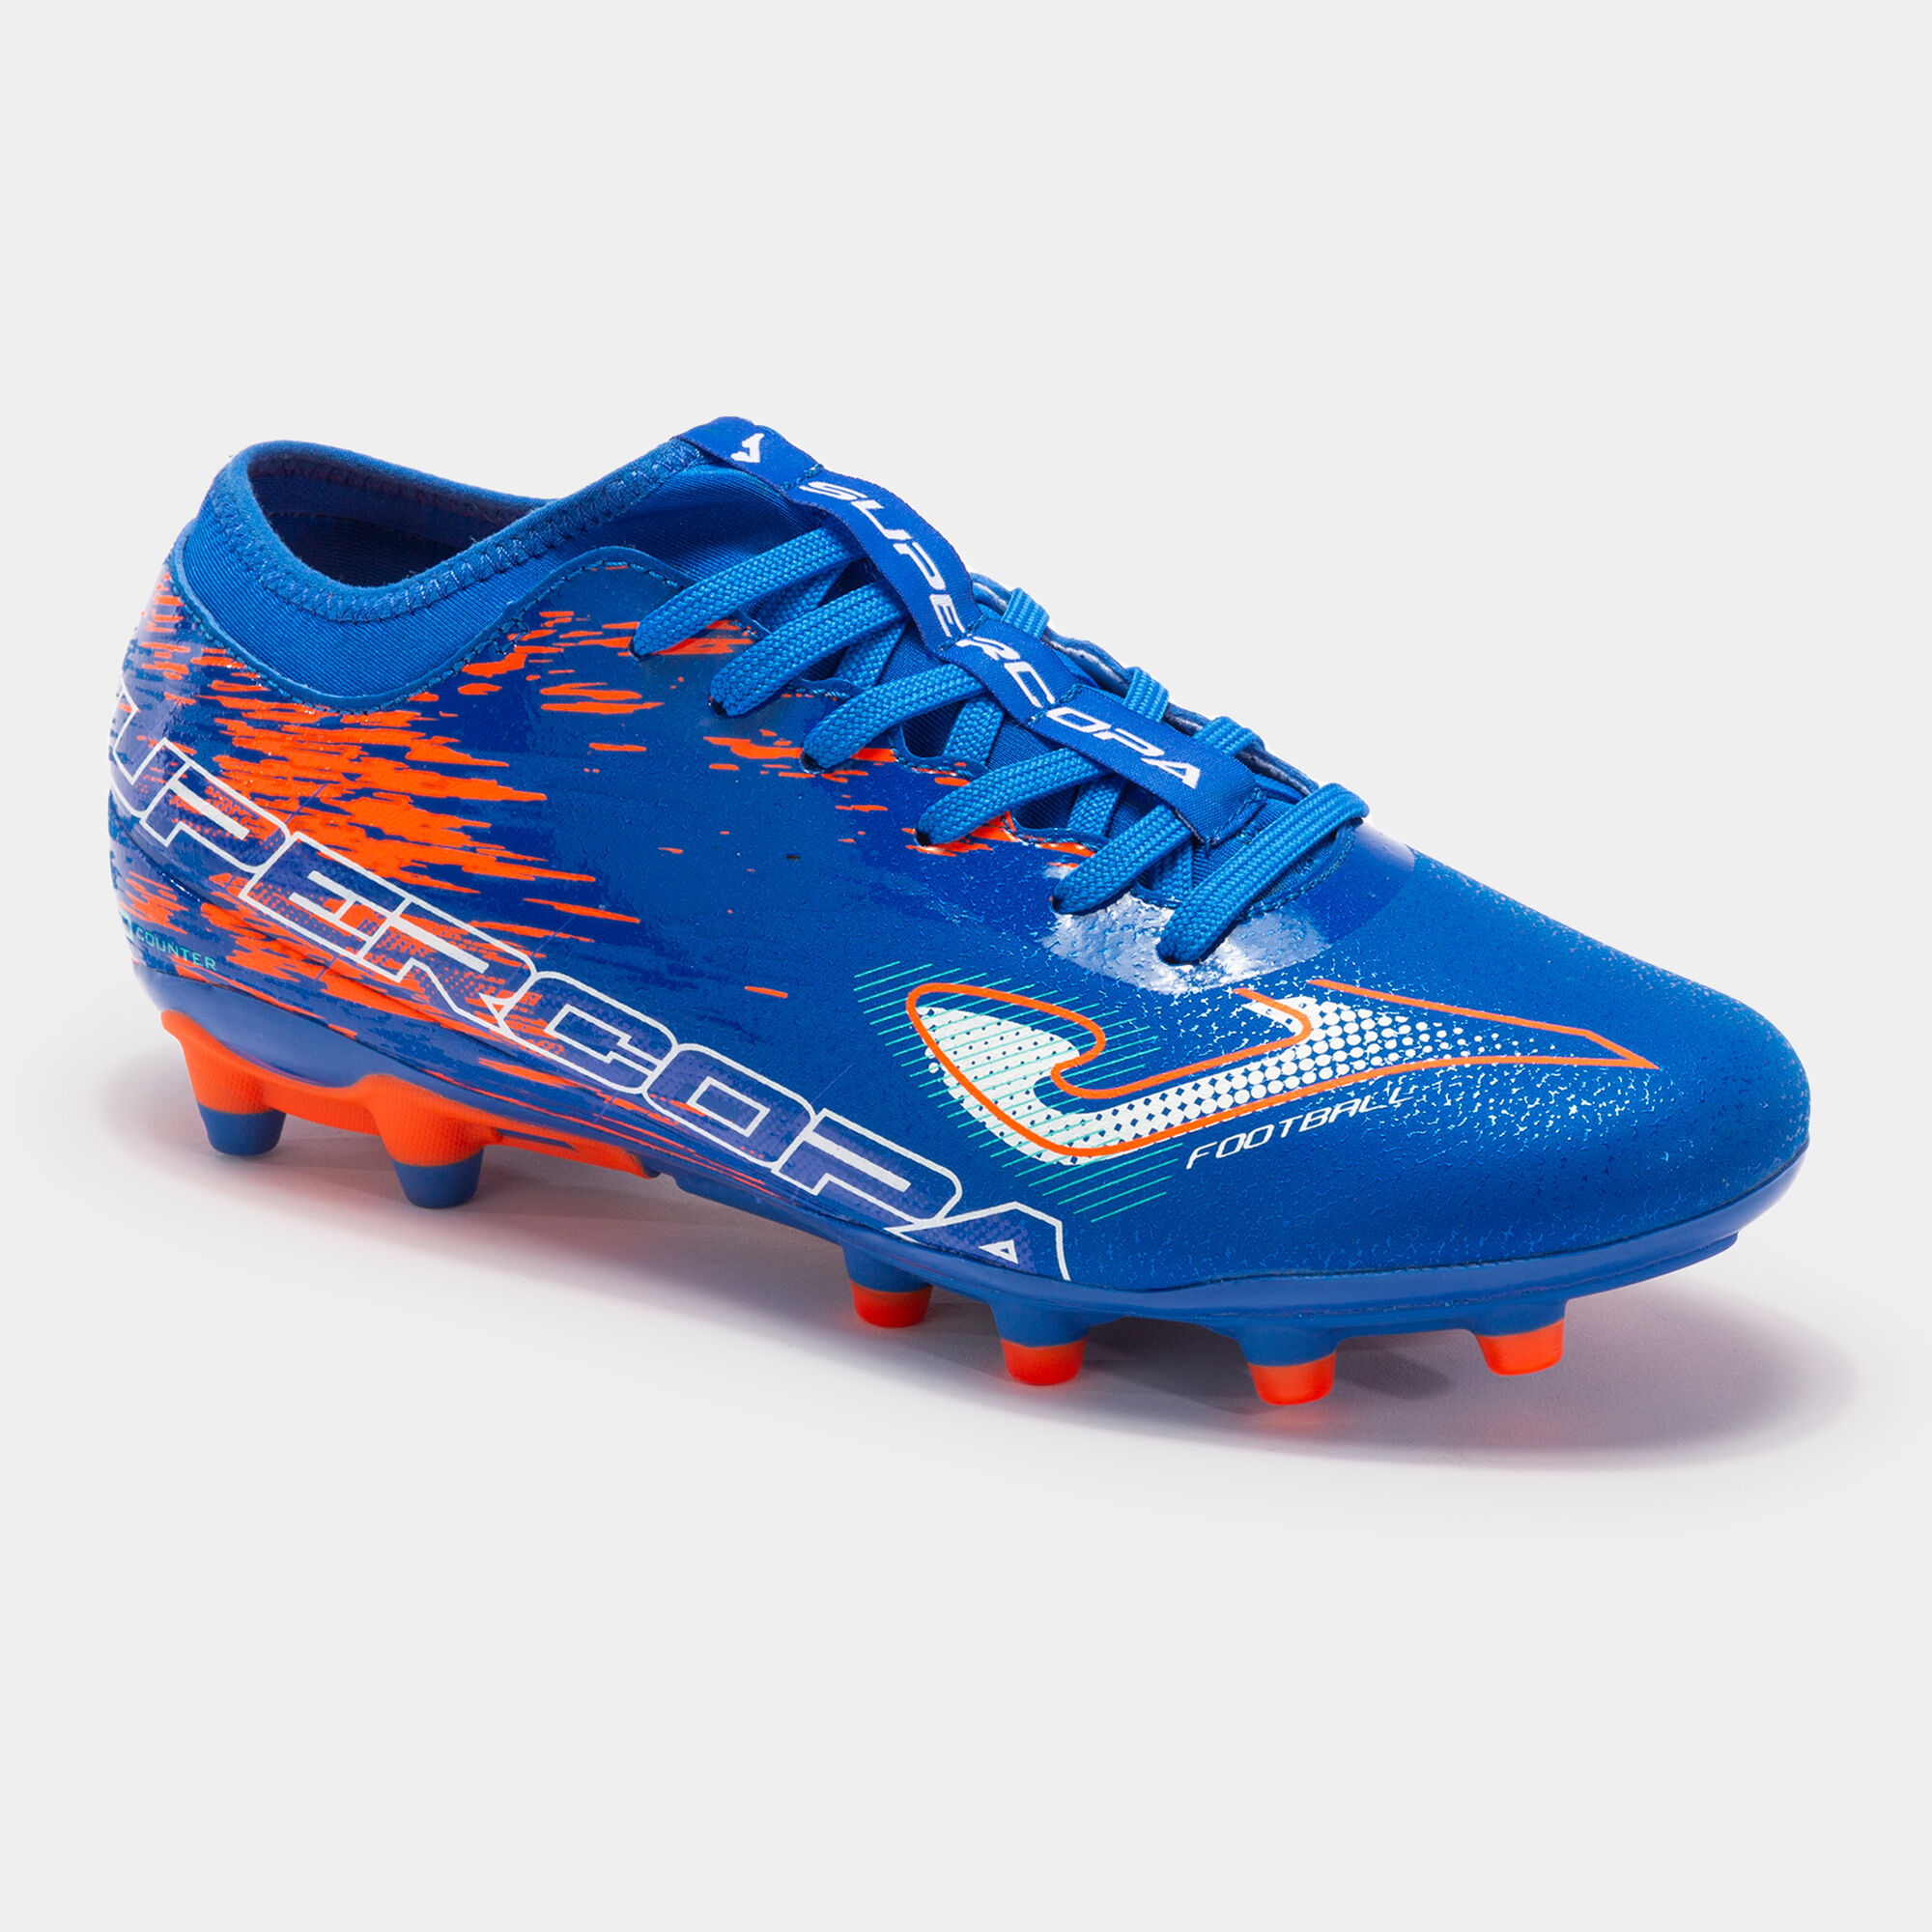 boots Supercopa 23 firm ground FG royal blue | JOMA®